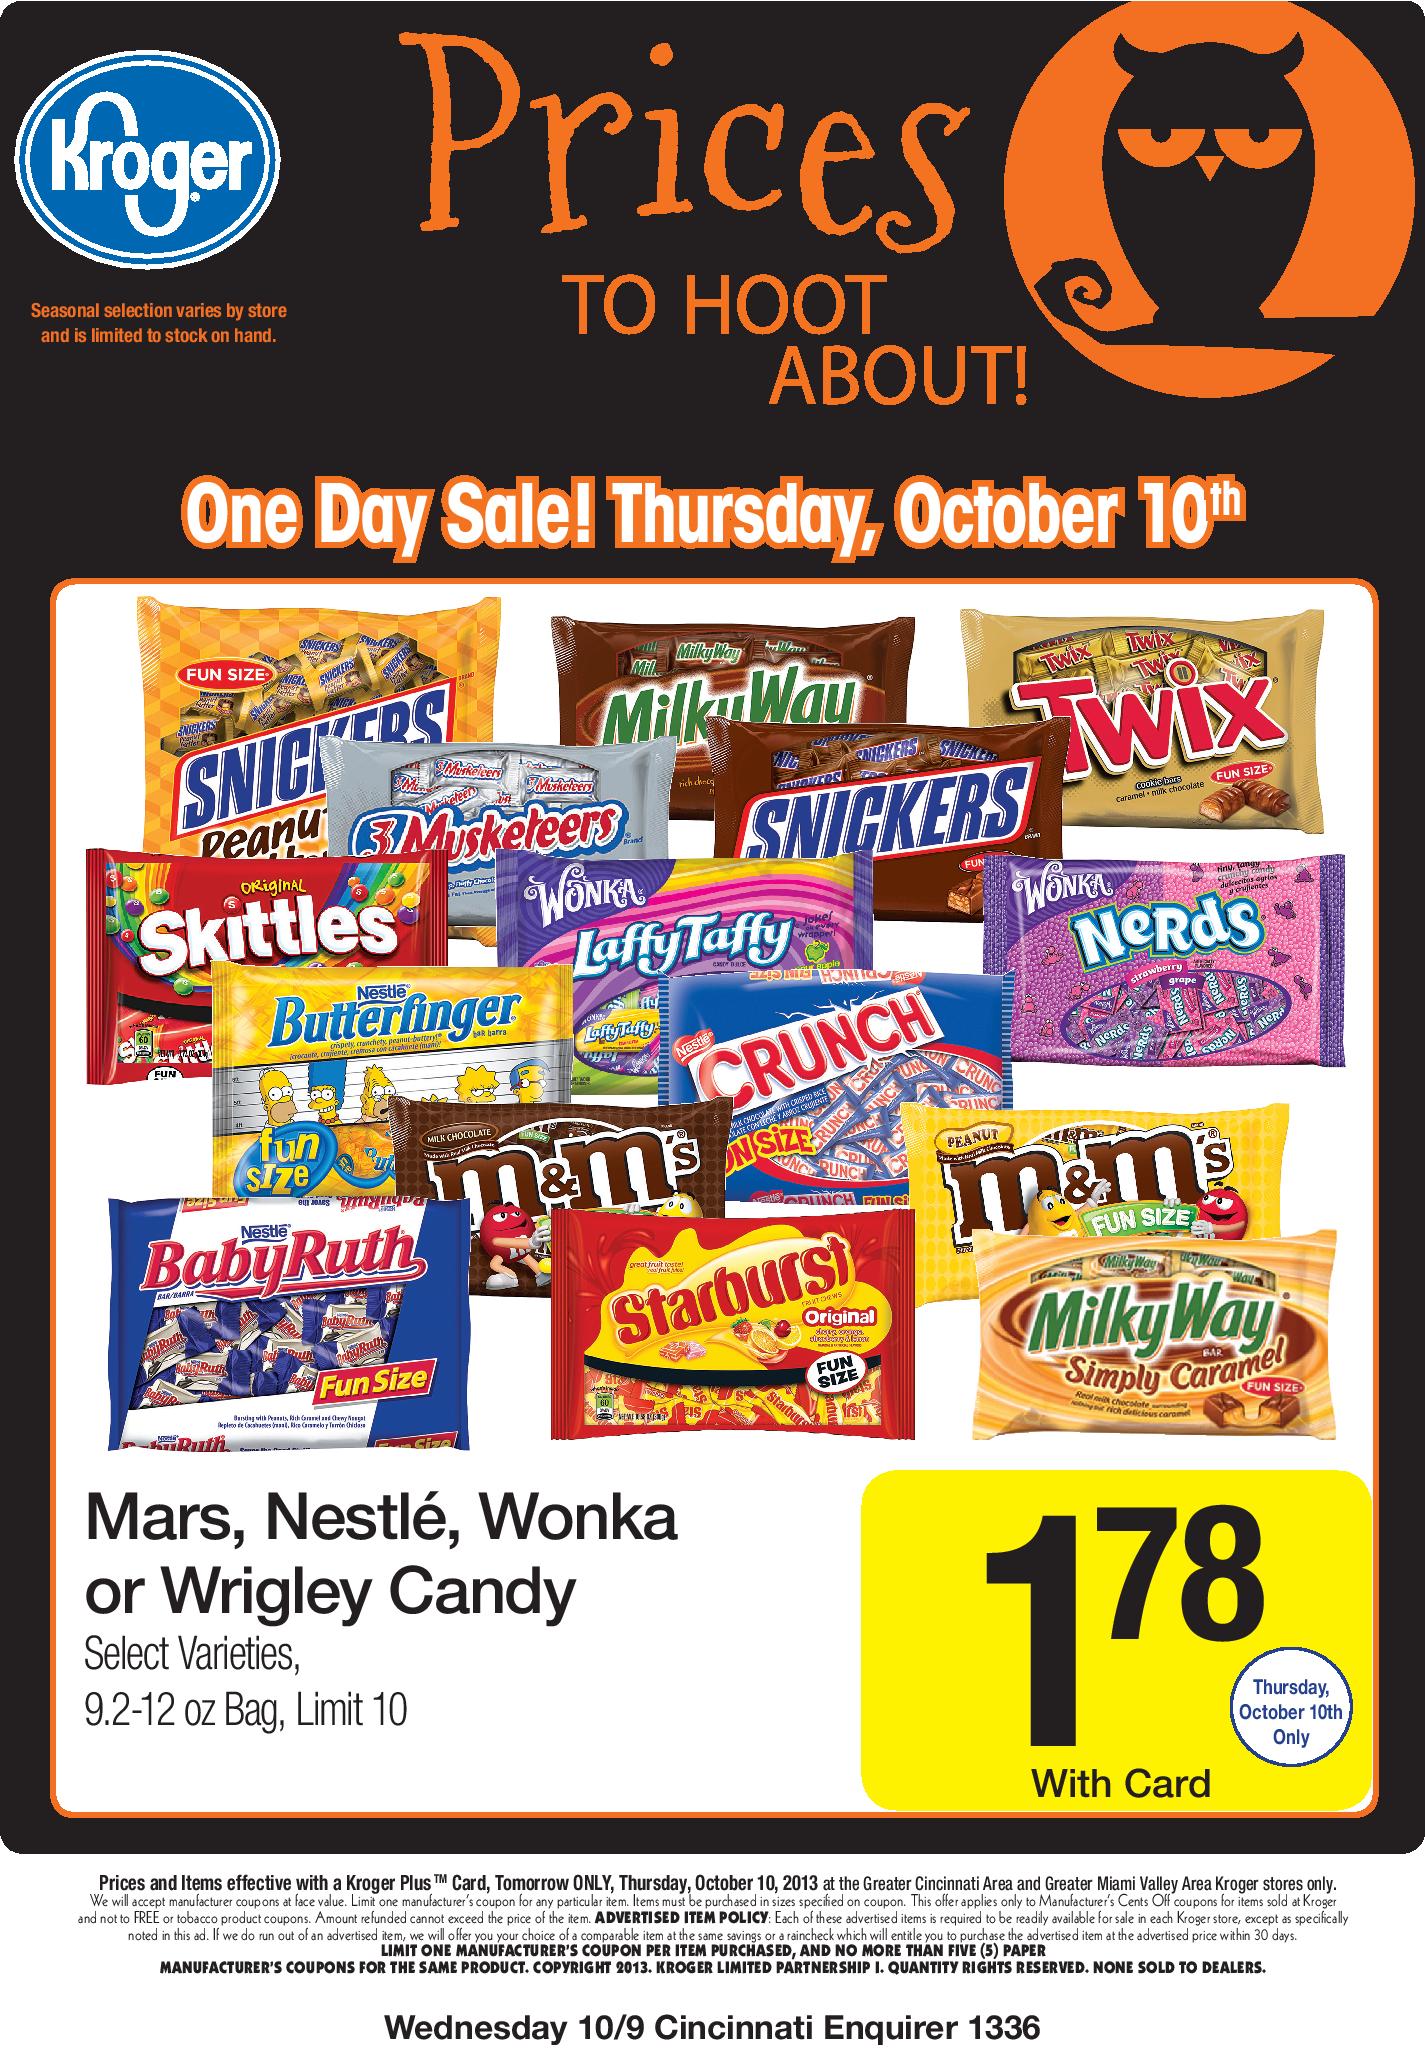 Kroger Halloween Candy Sale THIS THURSDAY Take 10 With Tricia